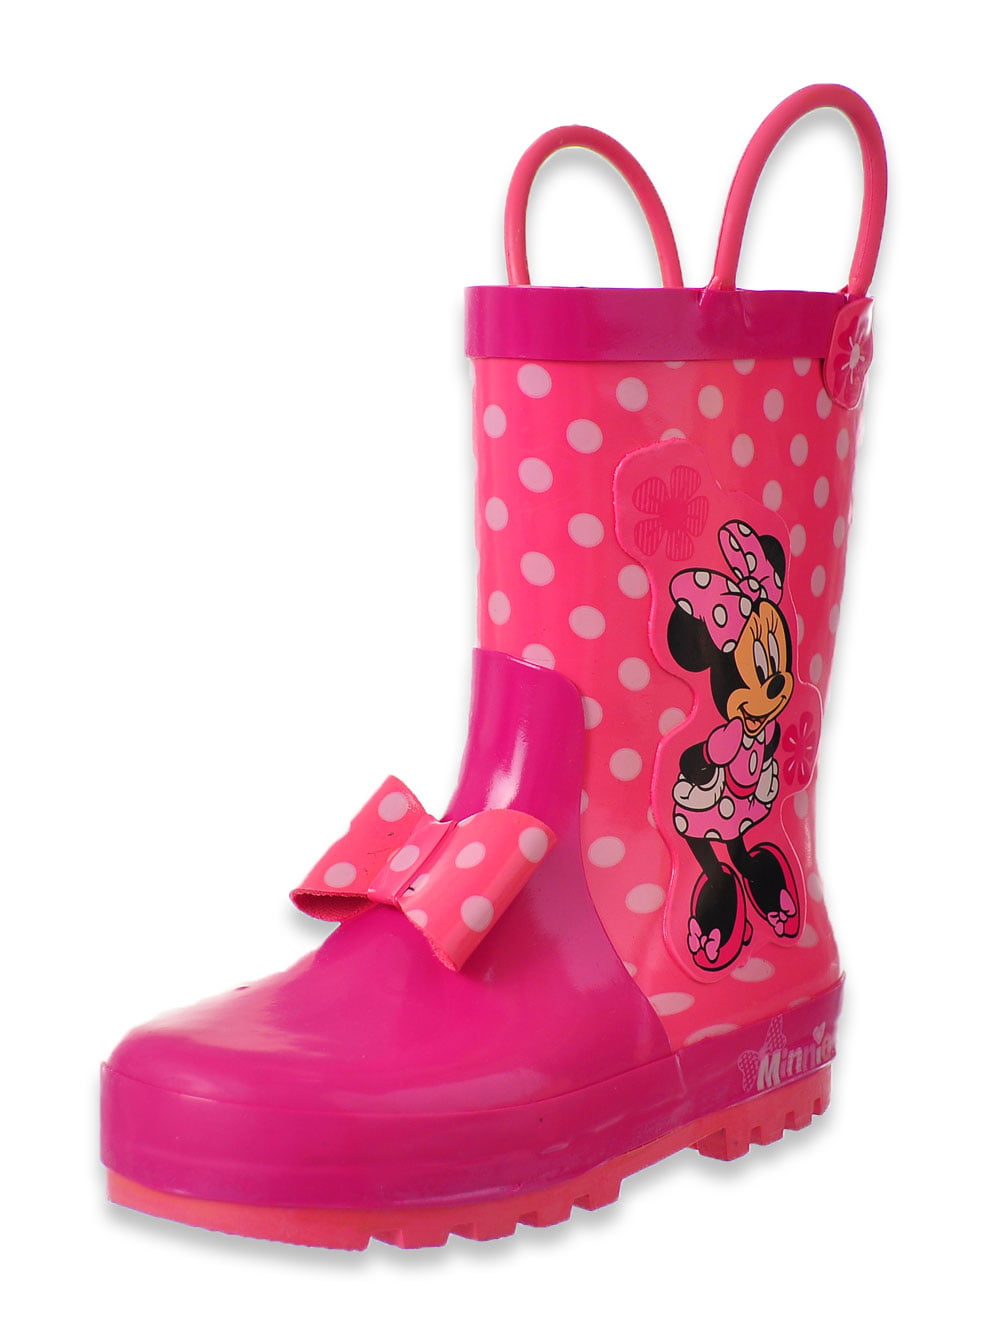 minnie mouse snow boots